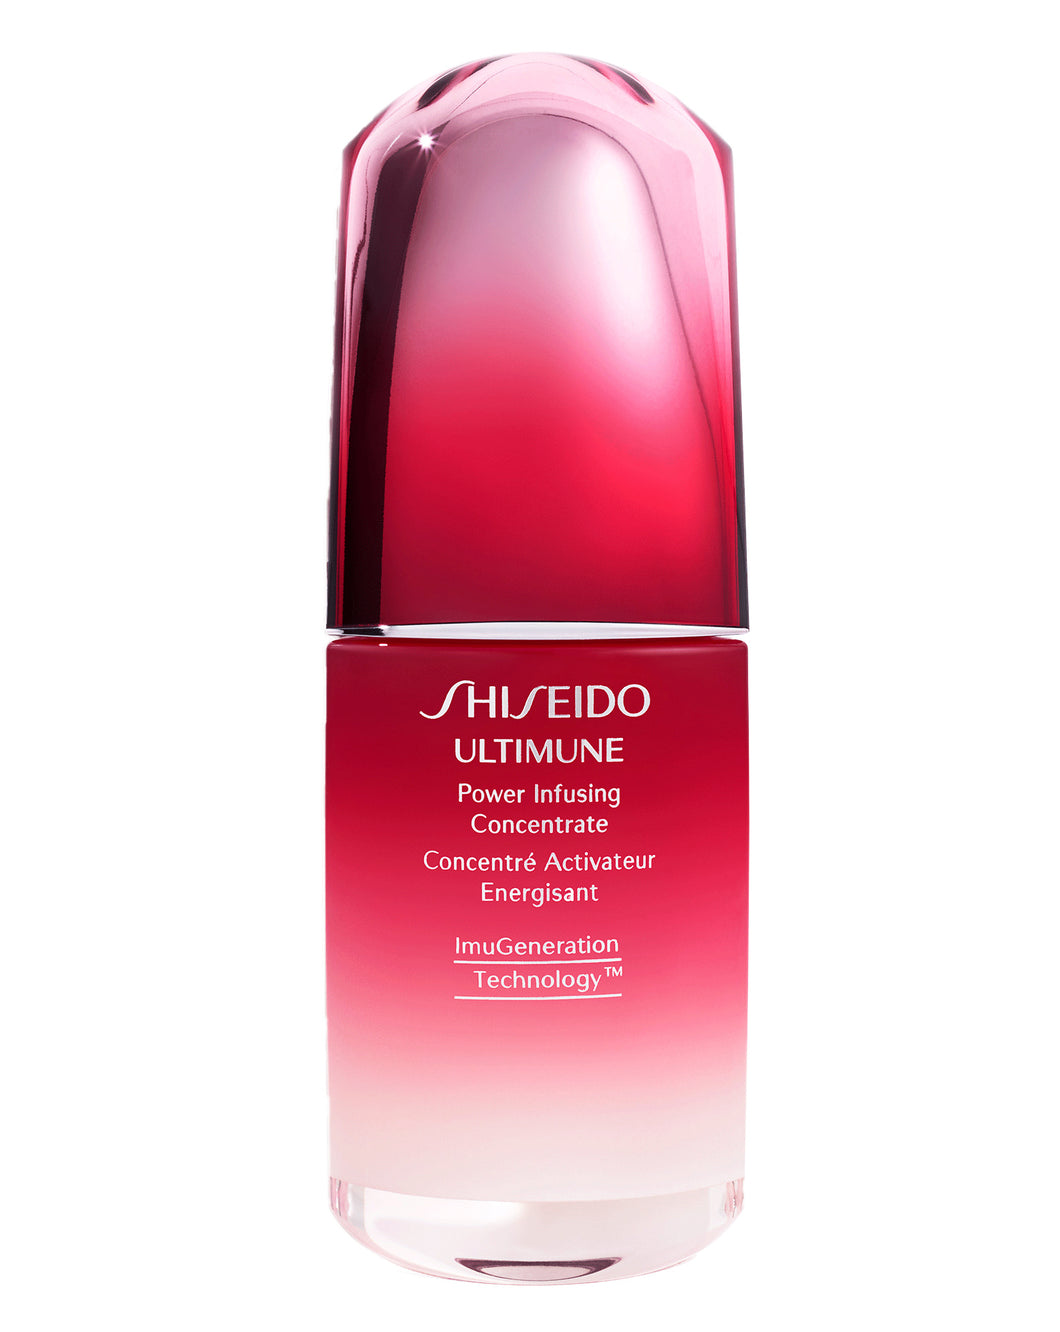 SHISEIDO ULTIMUNE POWER INFUSING CONCENTRATE 30ml